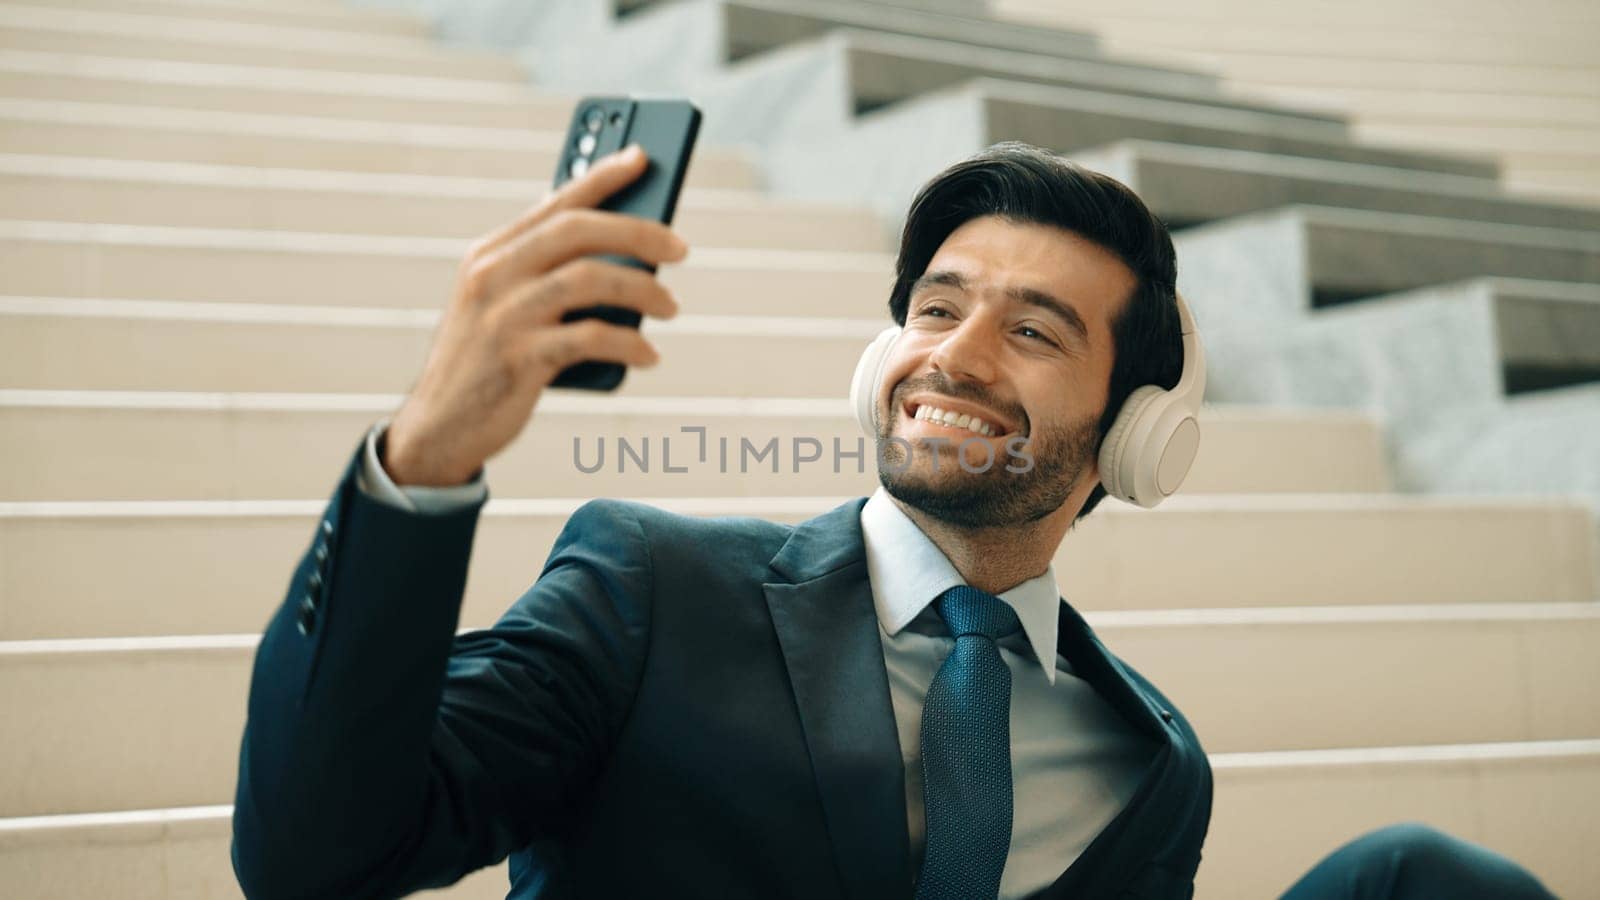 Happy smart business man taking selfie while smiling at smart phone. Closeup image of professional executive manager sitting at stairs while wearing suit and headphone. Creative business. Exultant.